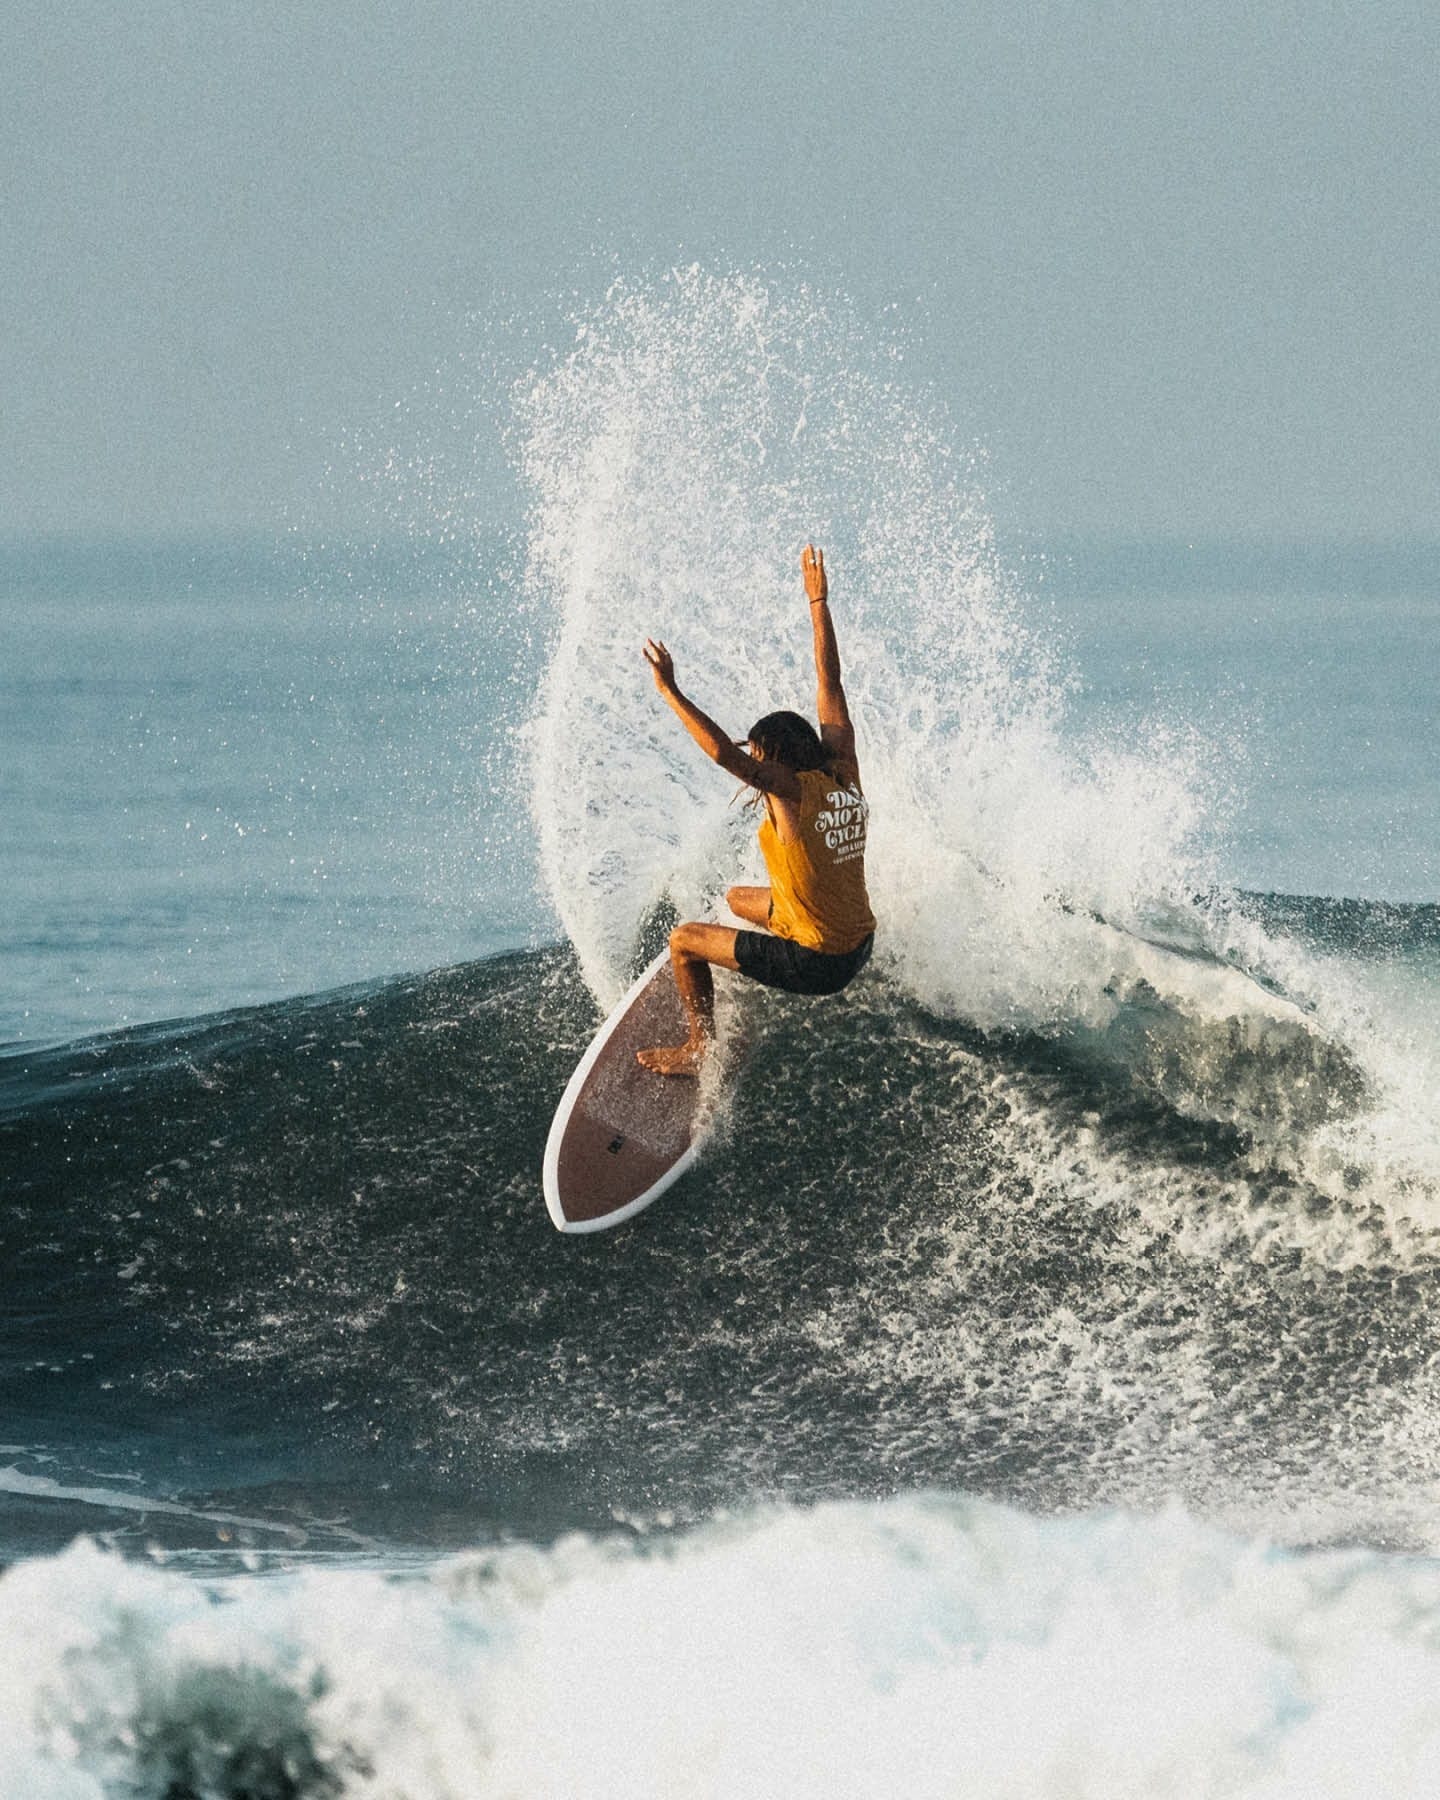 Bali—the magical island that continues to re-invent itself.